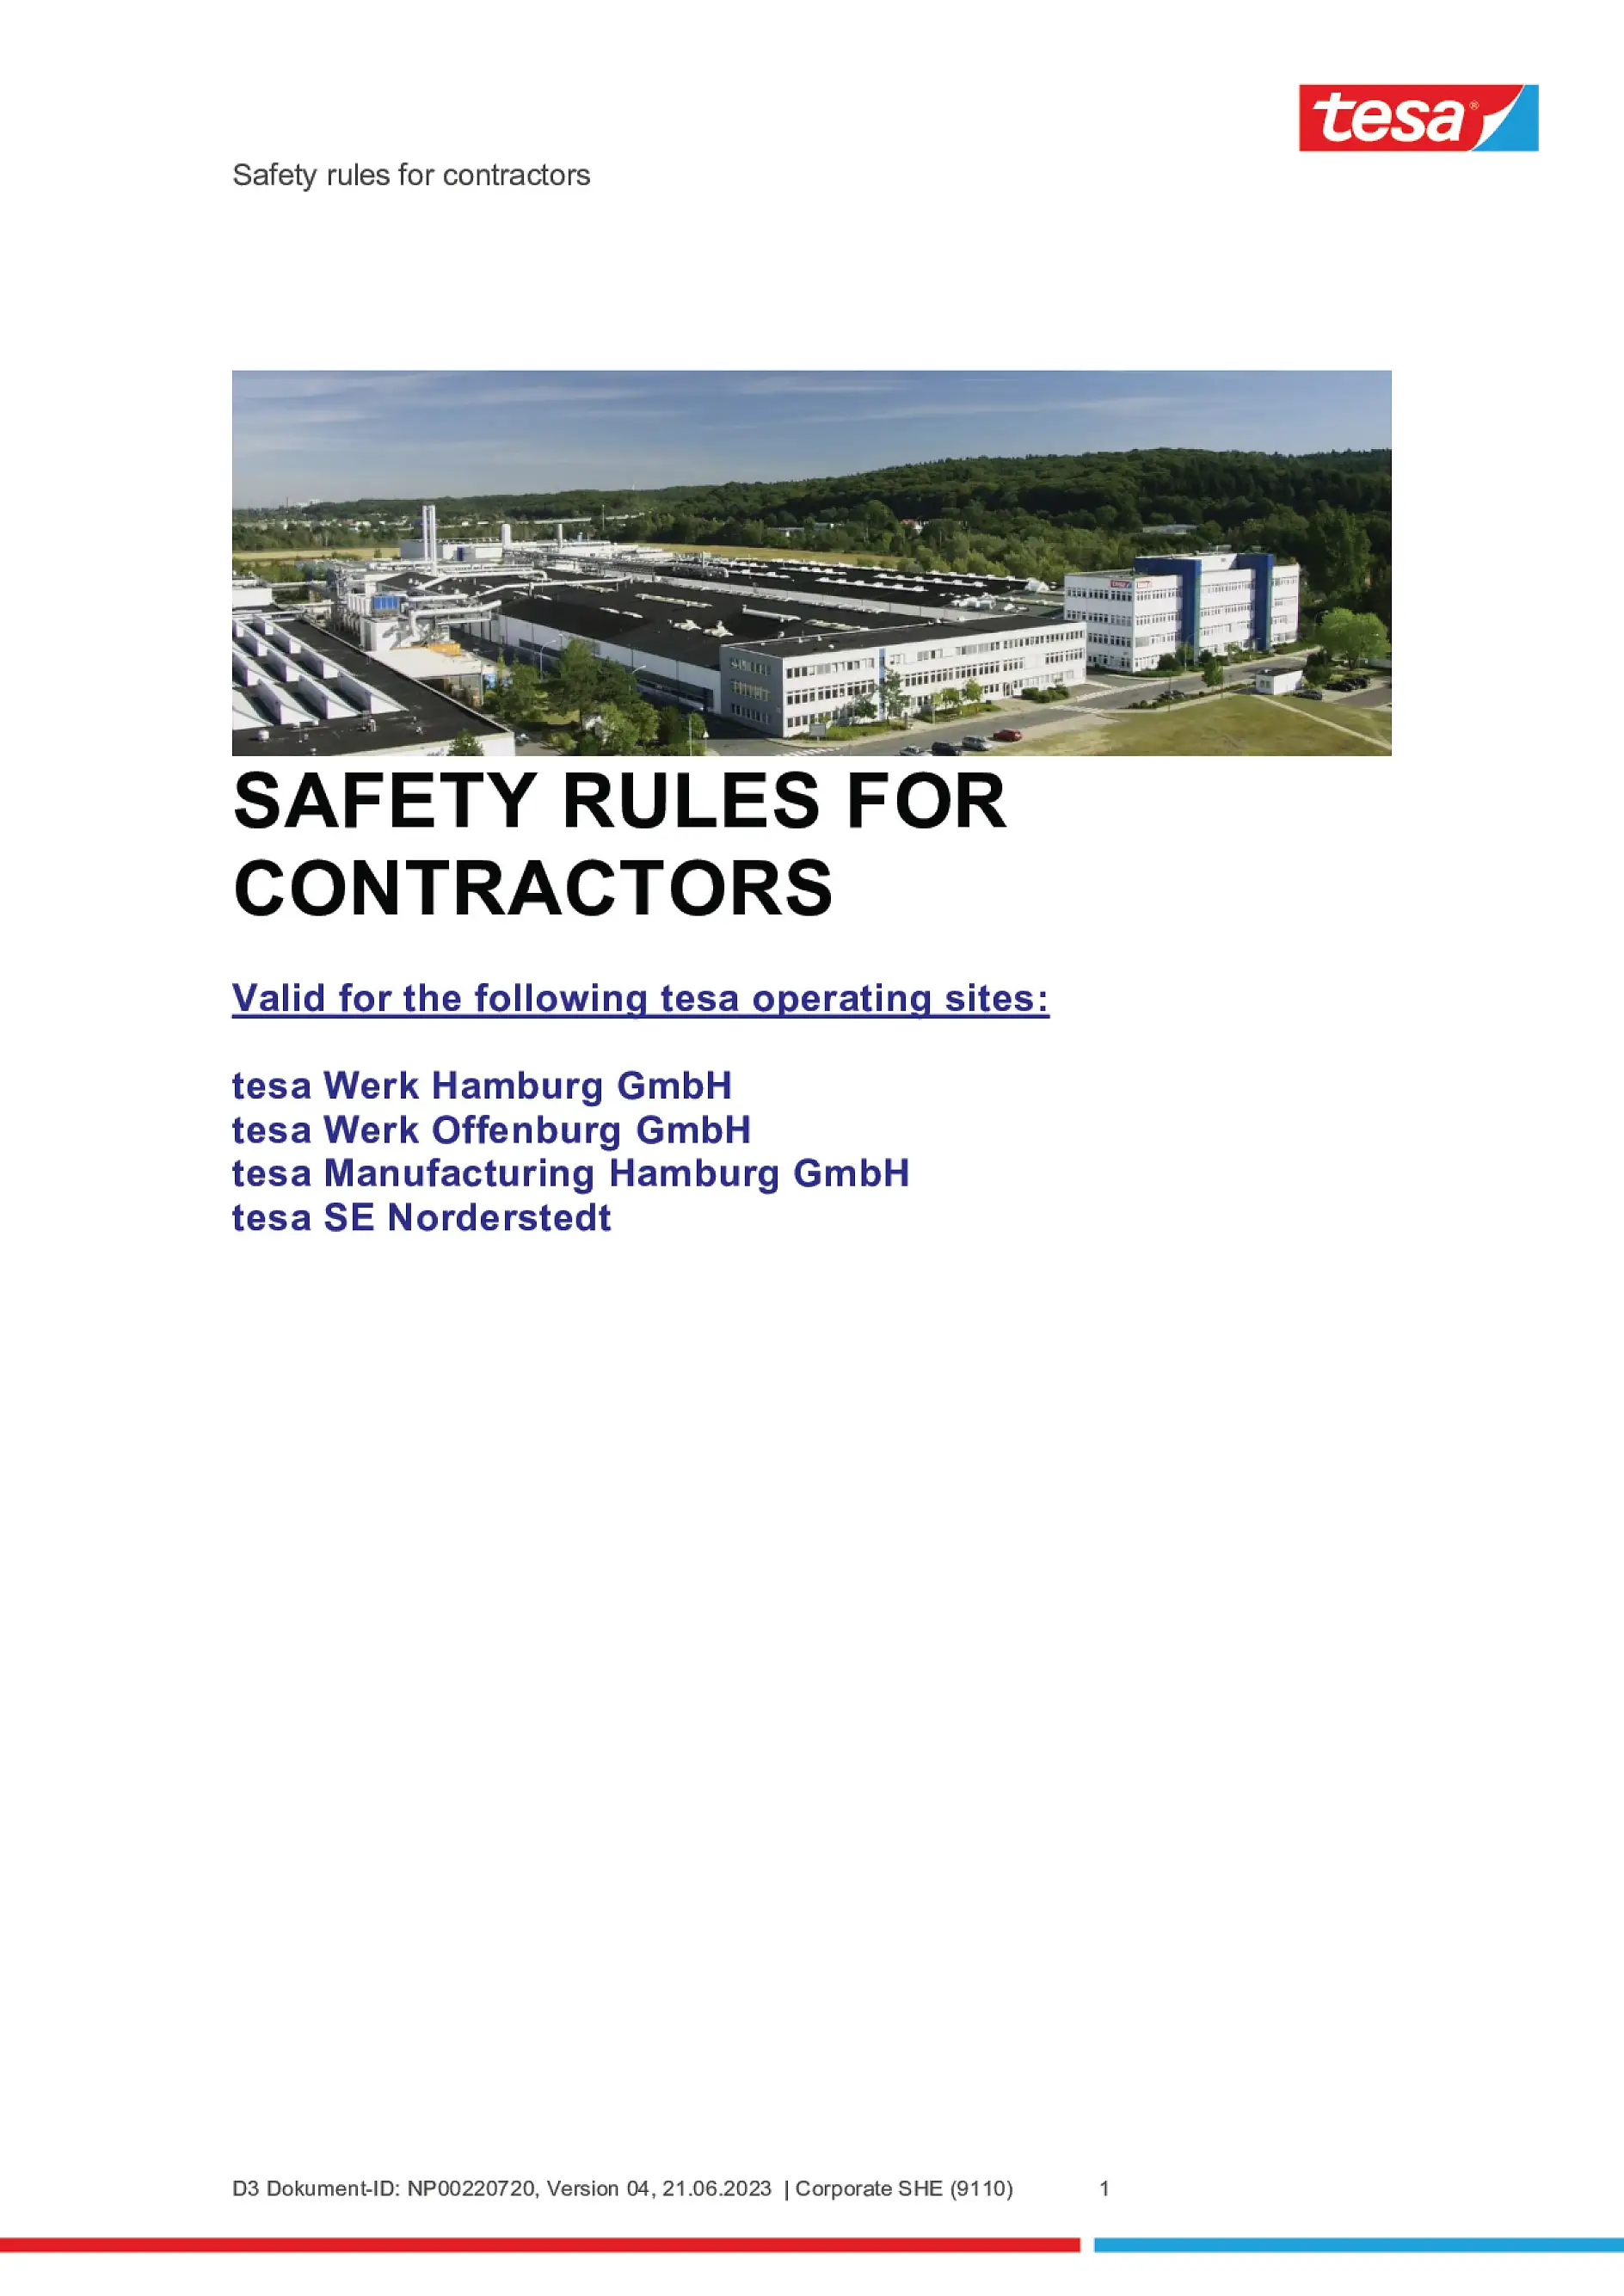 Safety Rules for Contractors at tesa SE HQ Norderstedt